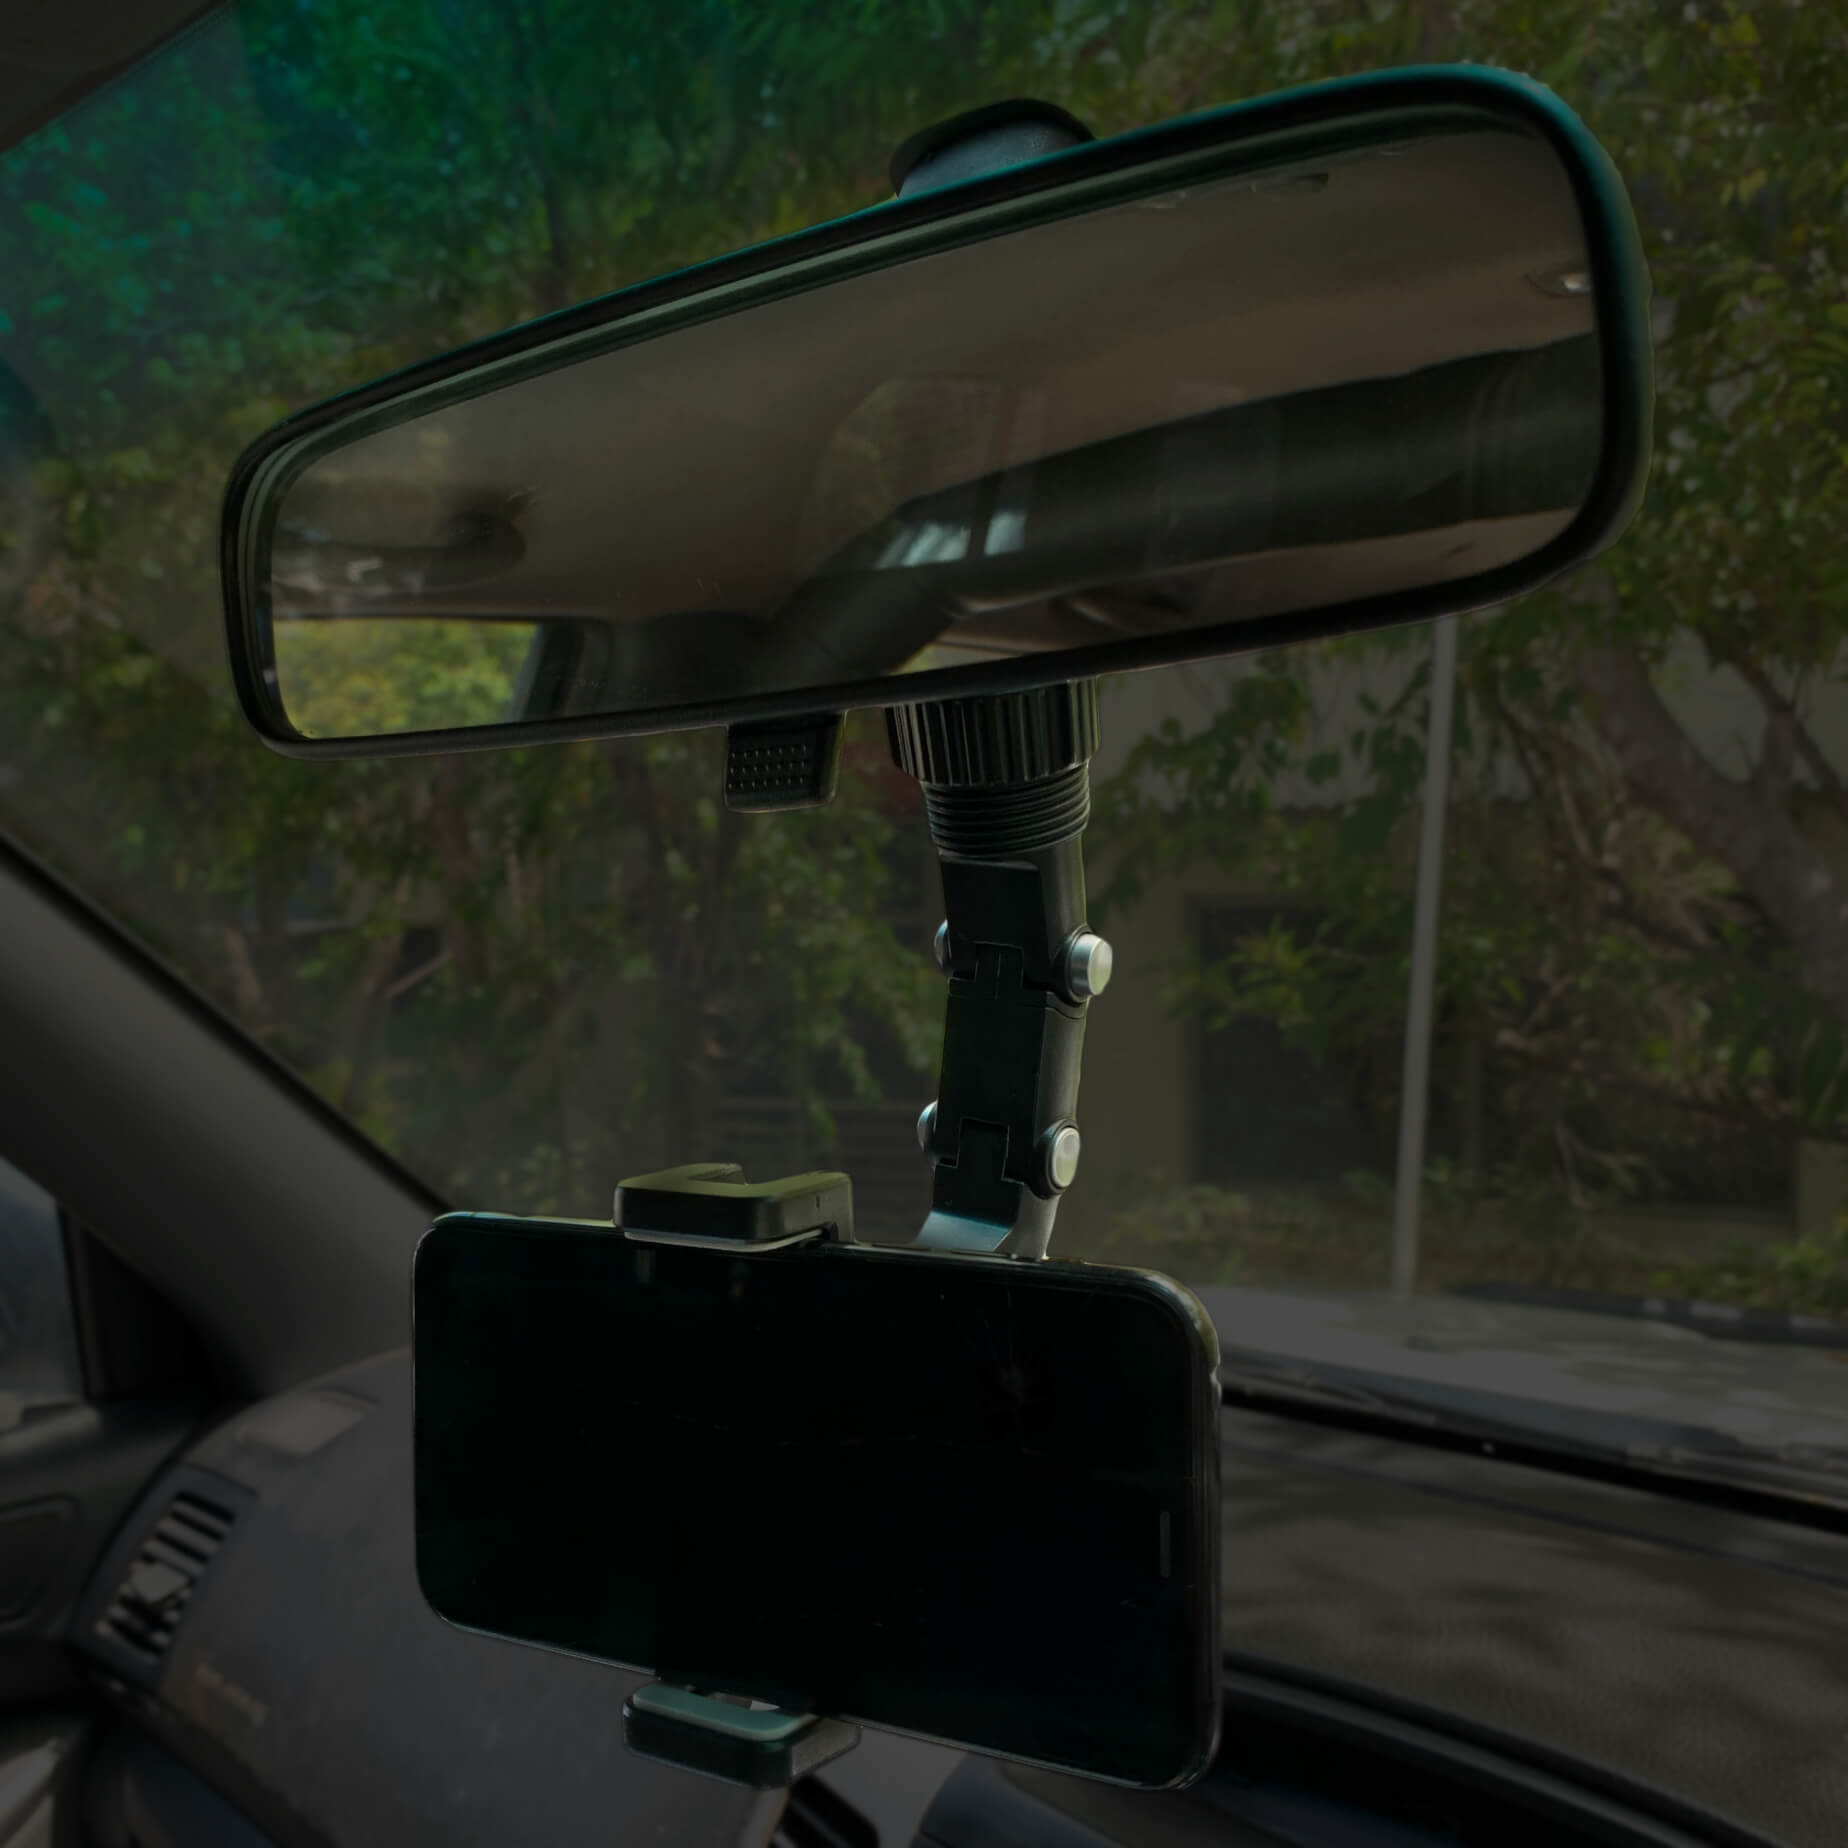 Rear view mirror phone holder being used in a car with landscape orientation